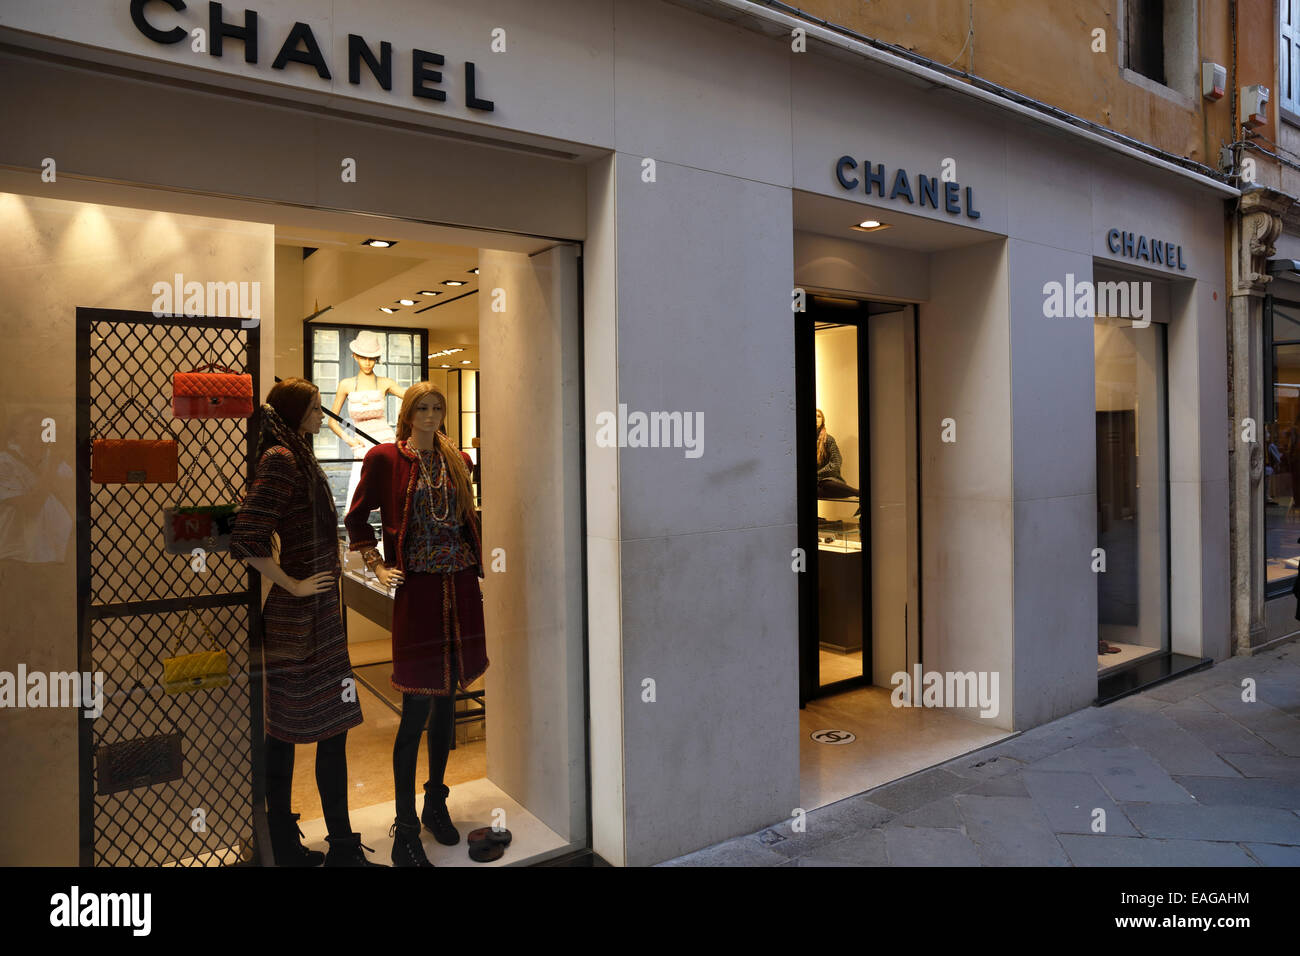 The Chanel store in Venice, Italy Stock Photo - Alamy